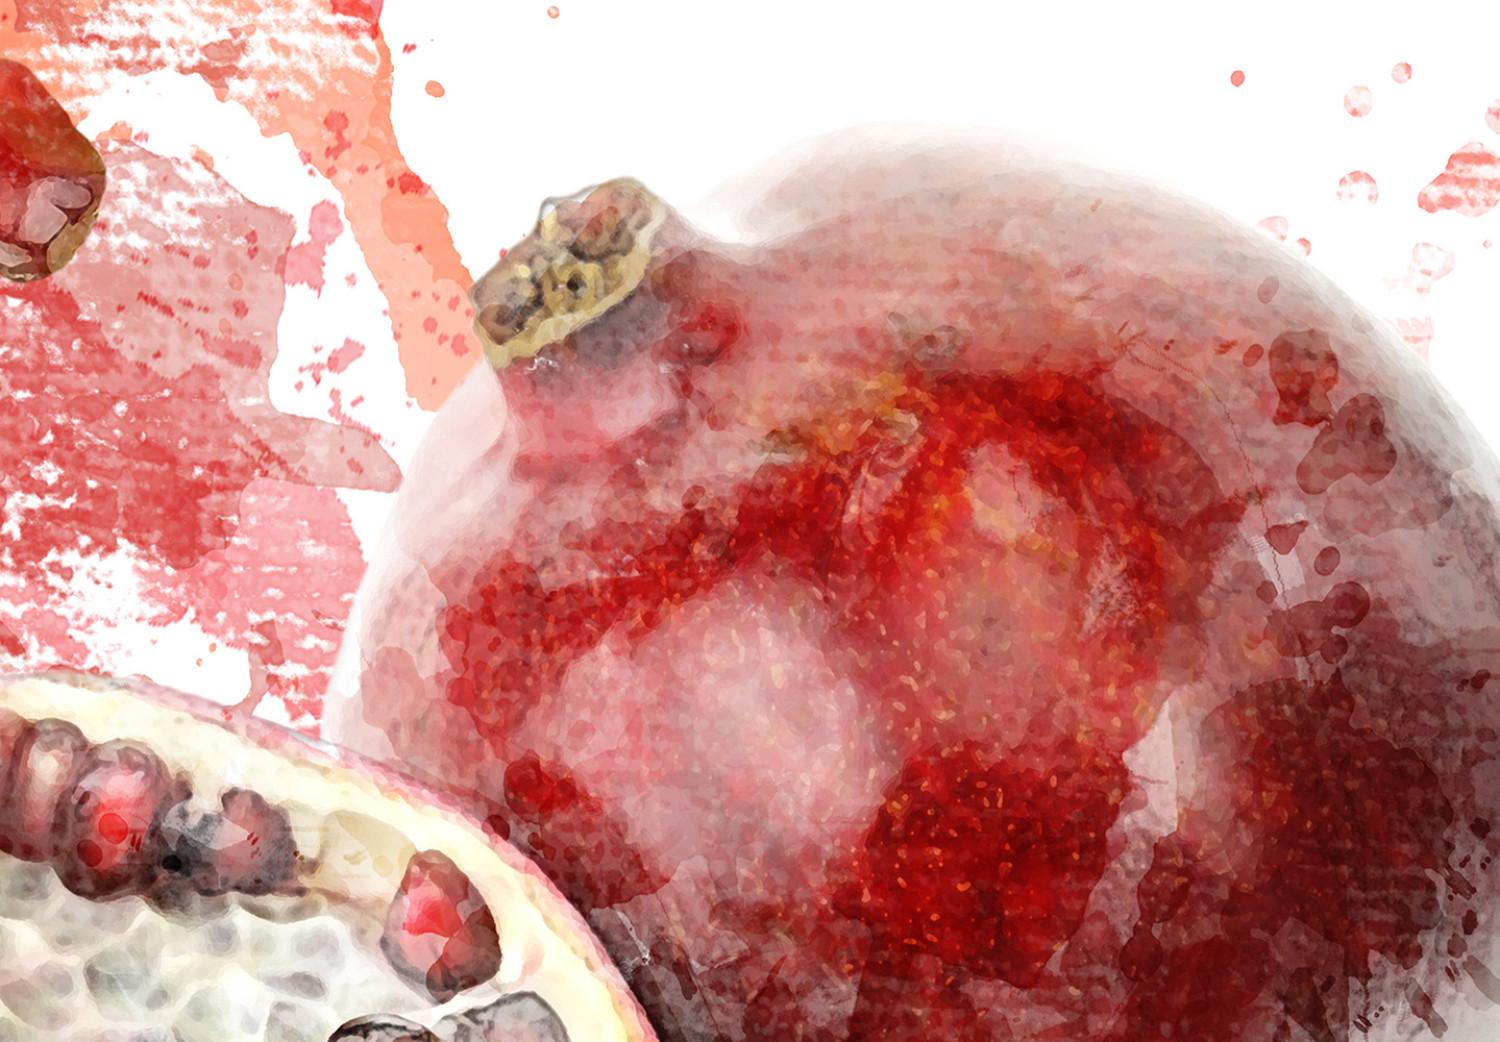 Cuadro decorativo Pomegranate - Red Fruits on a Watercolor Stain of Color